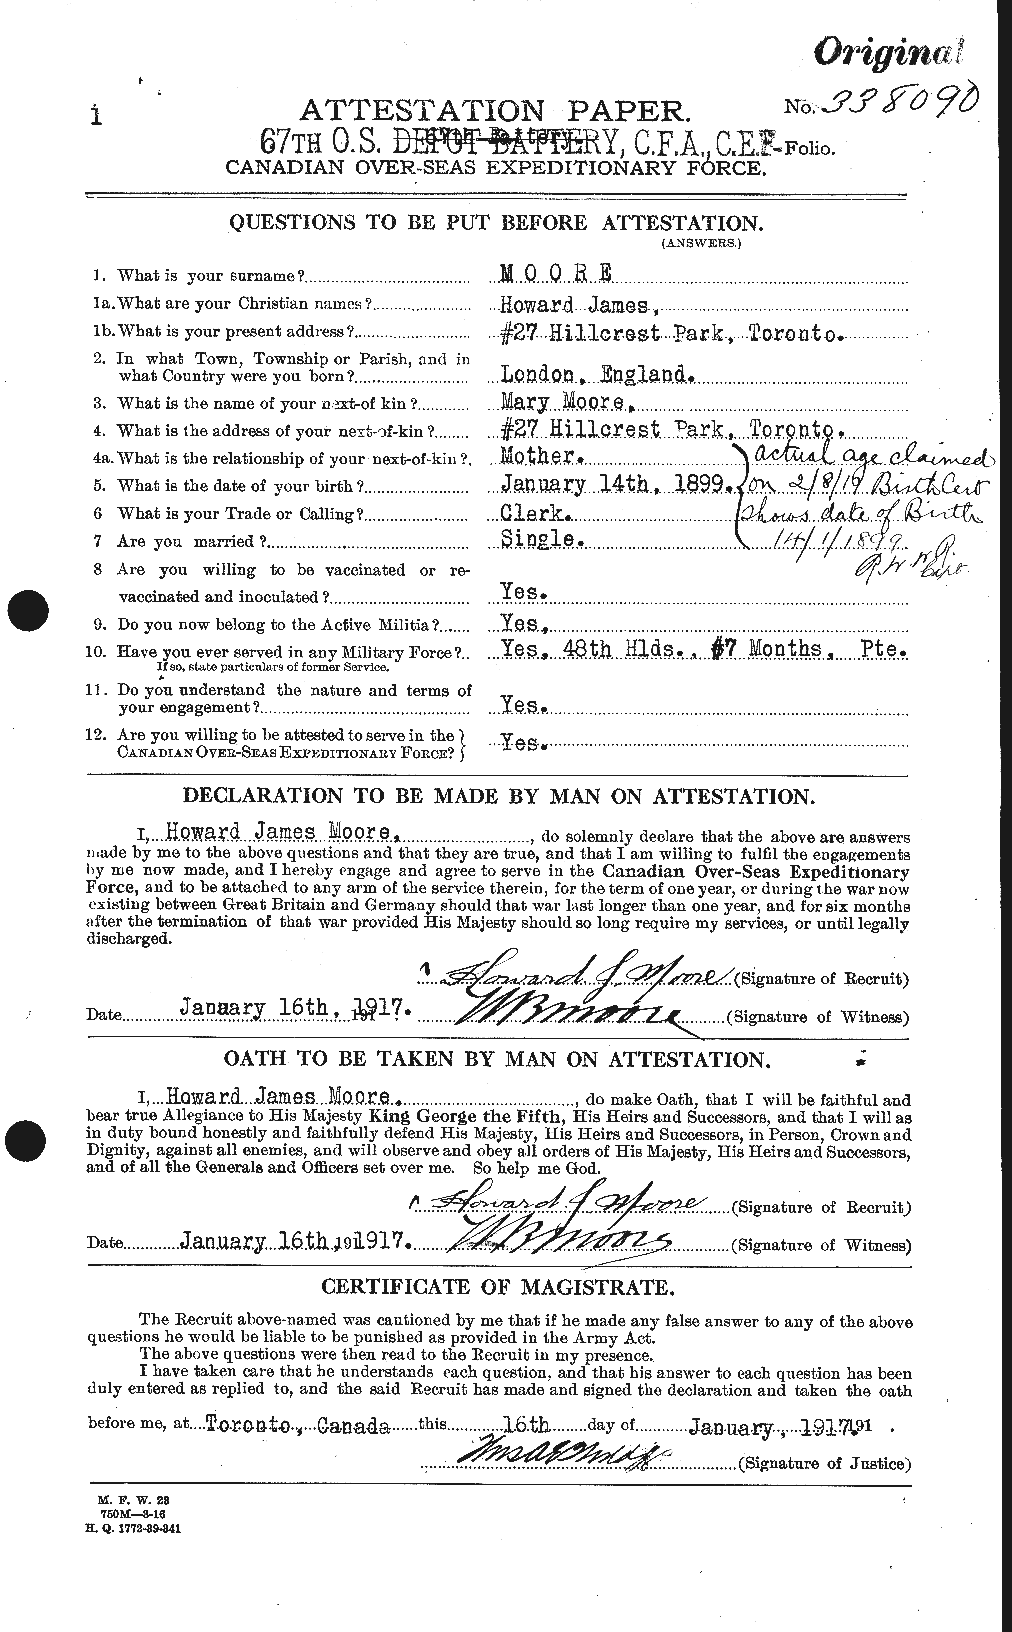 Personnel Records of the First World War - CEF 502137a